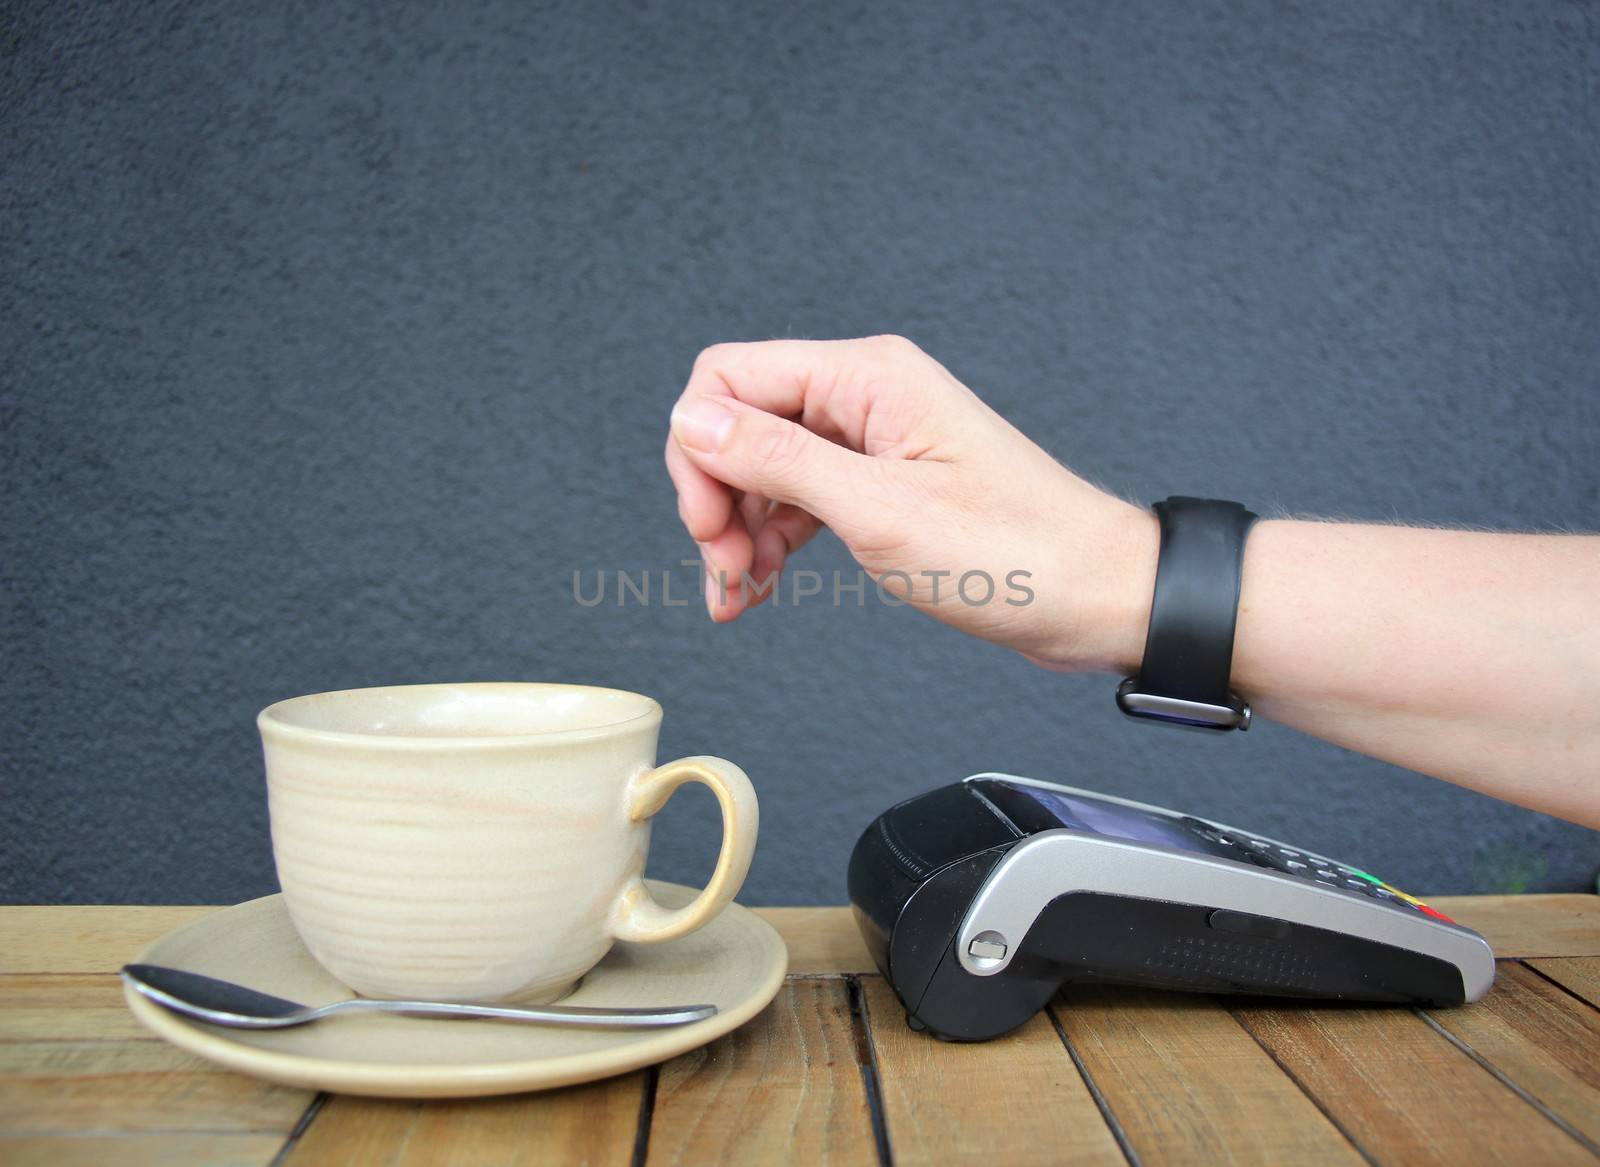 contactless payment smartwatch watch pdq nfc background with copy space 